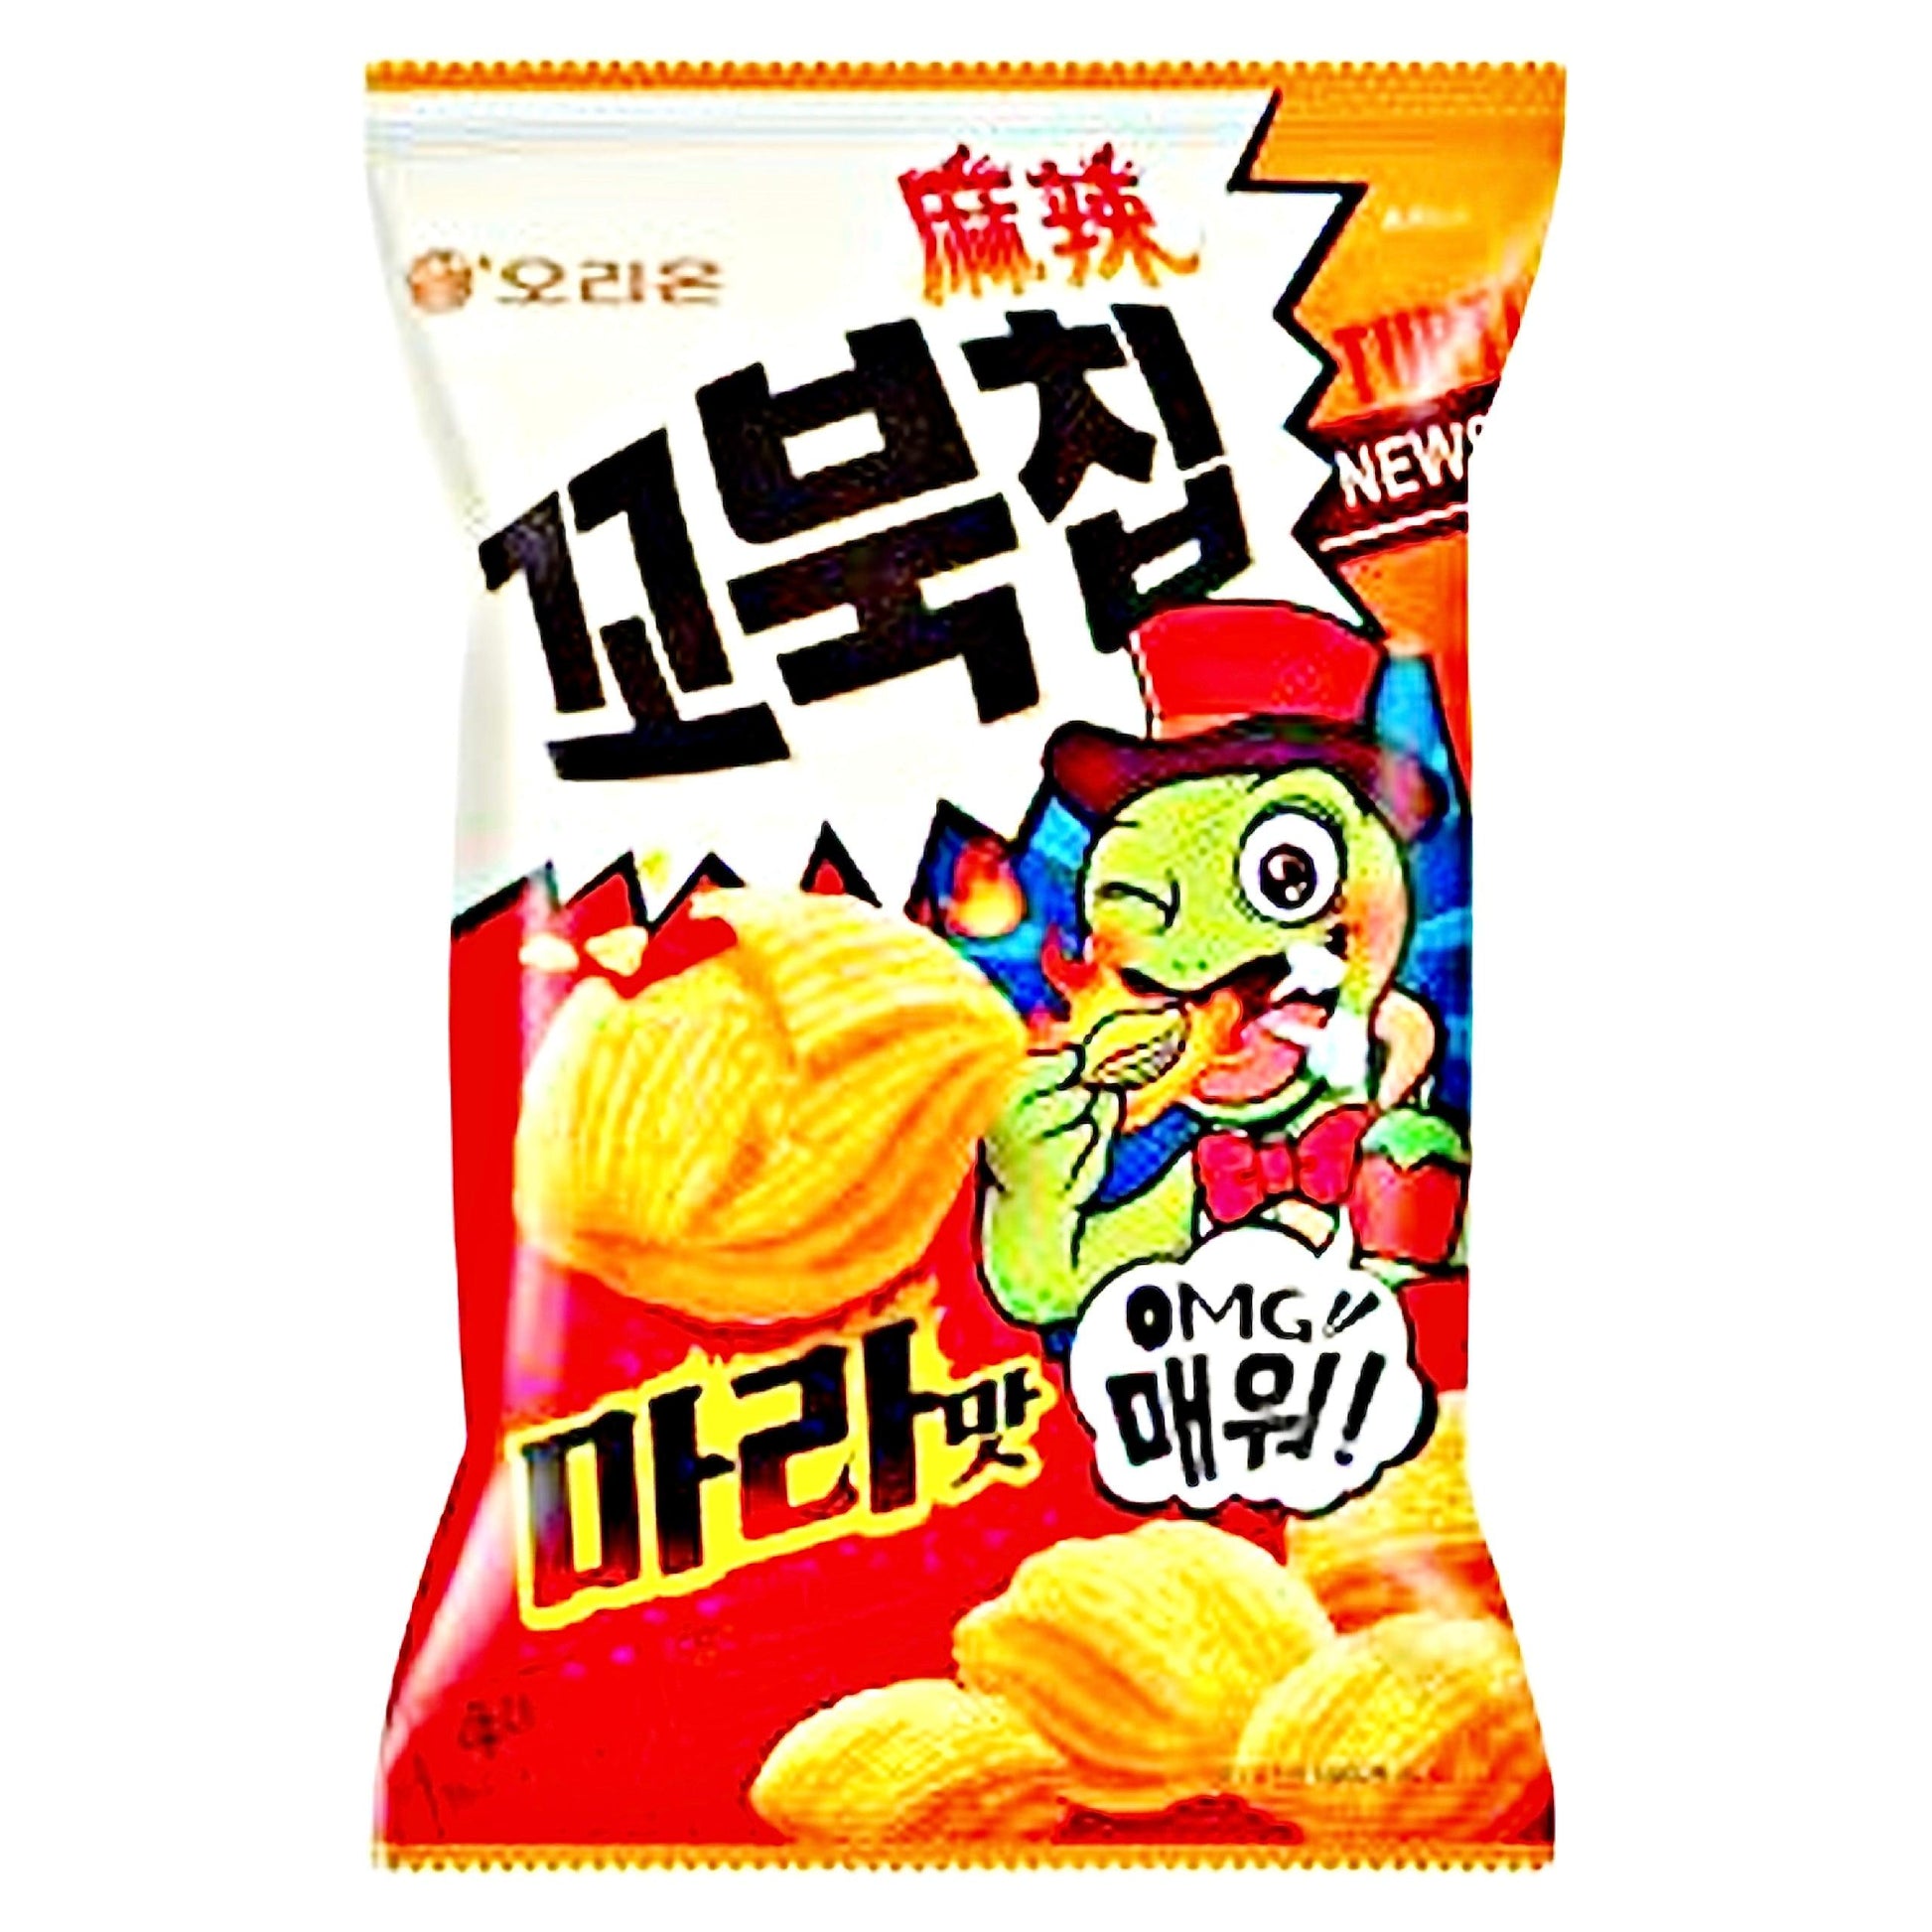 Orion Turtle Chips Mala 80g - The Snacks Box - Asian Snacks Store - The Snacks Box - Korean Snack - Japanese Snack